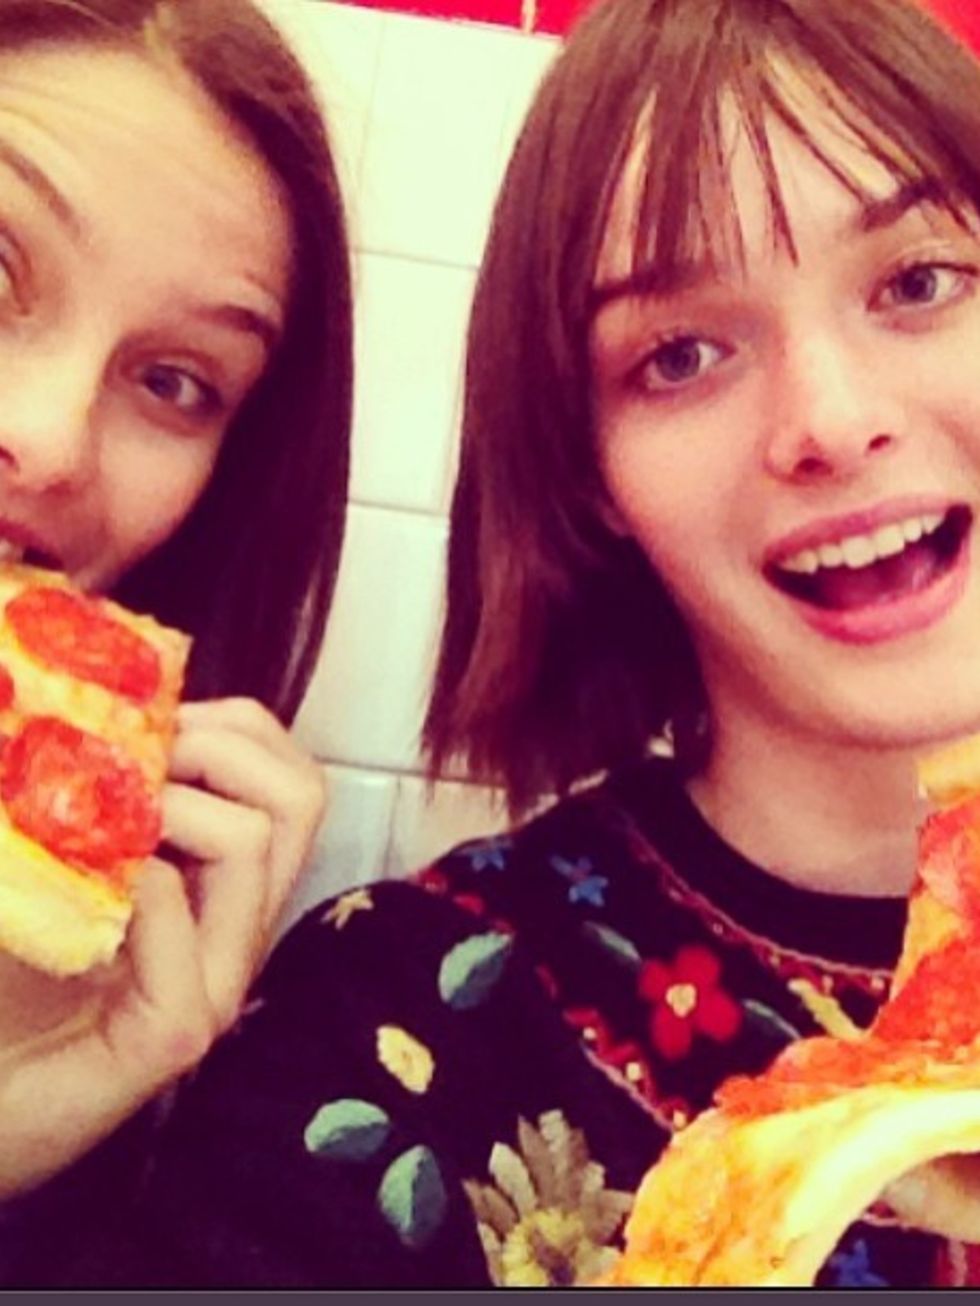 <p>She's the Brit-model that doesn't take herself too seriously. Pictured here with BFF @charlottewiggins (also worth a follow).</p>

<p>@samrollinson</p>